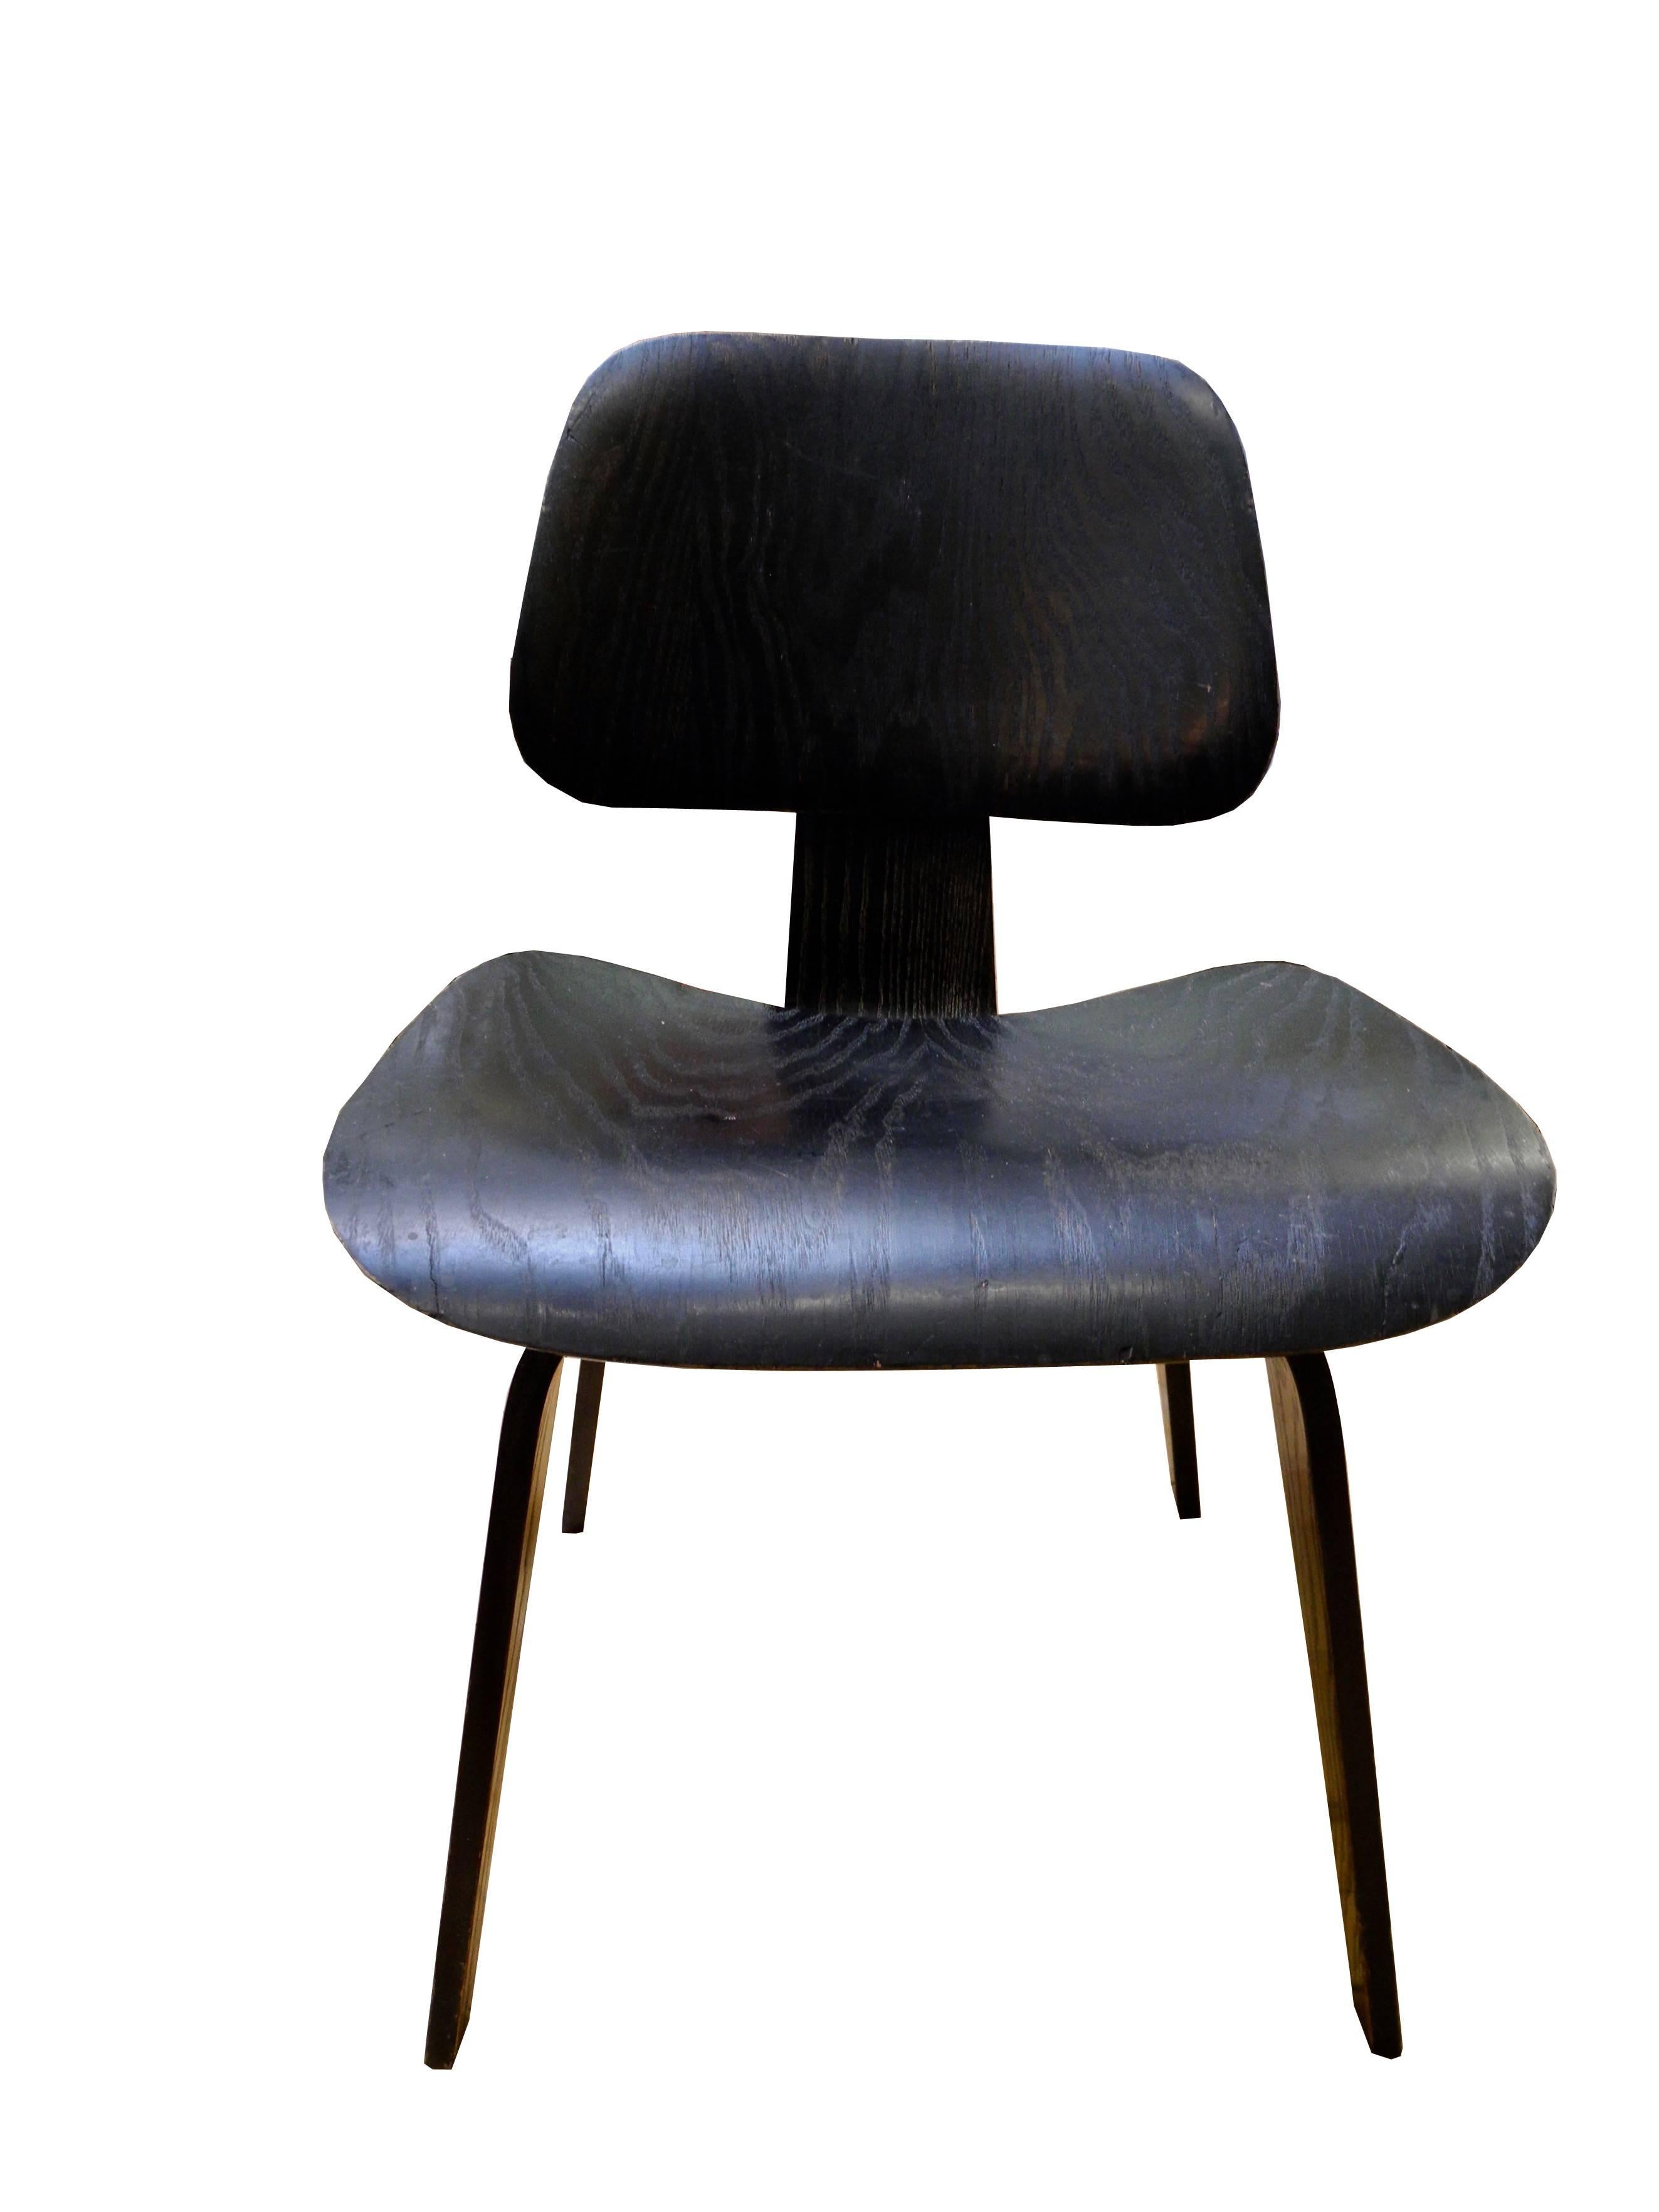 This original molded plywood dining height chair in black was designed by Charles Eames, manufactured by Evans Company and distributed by Herman Miller.